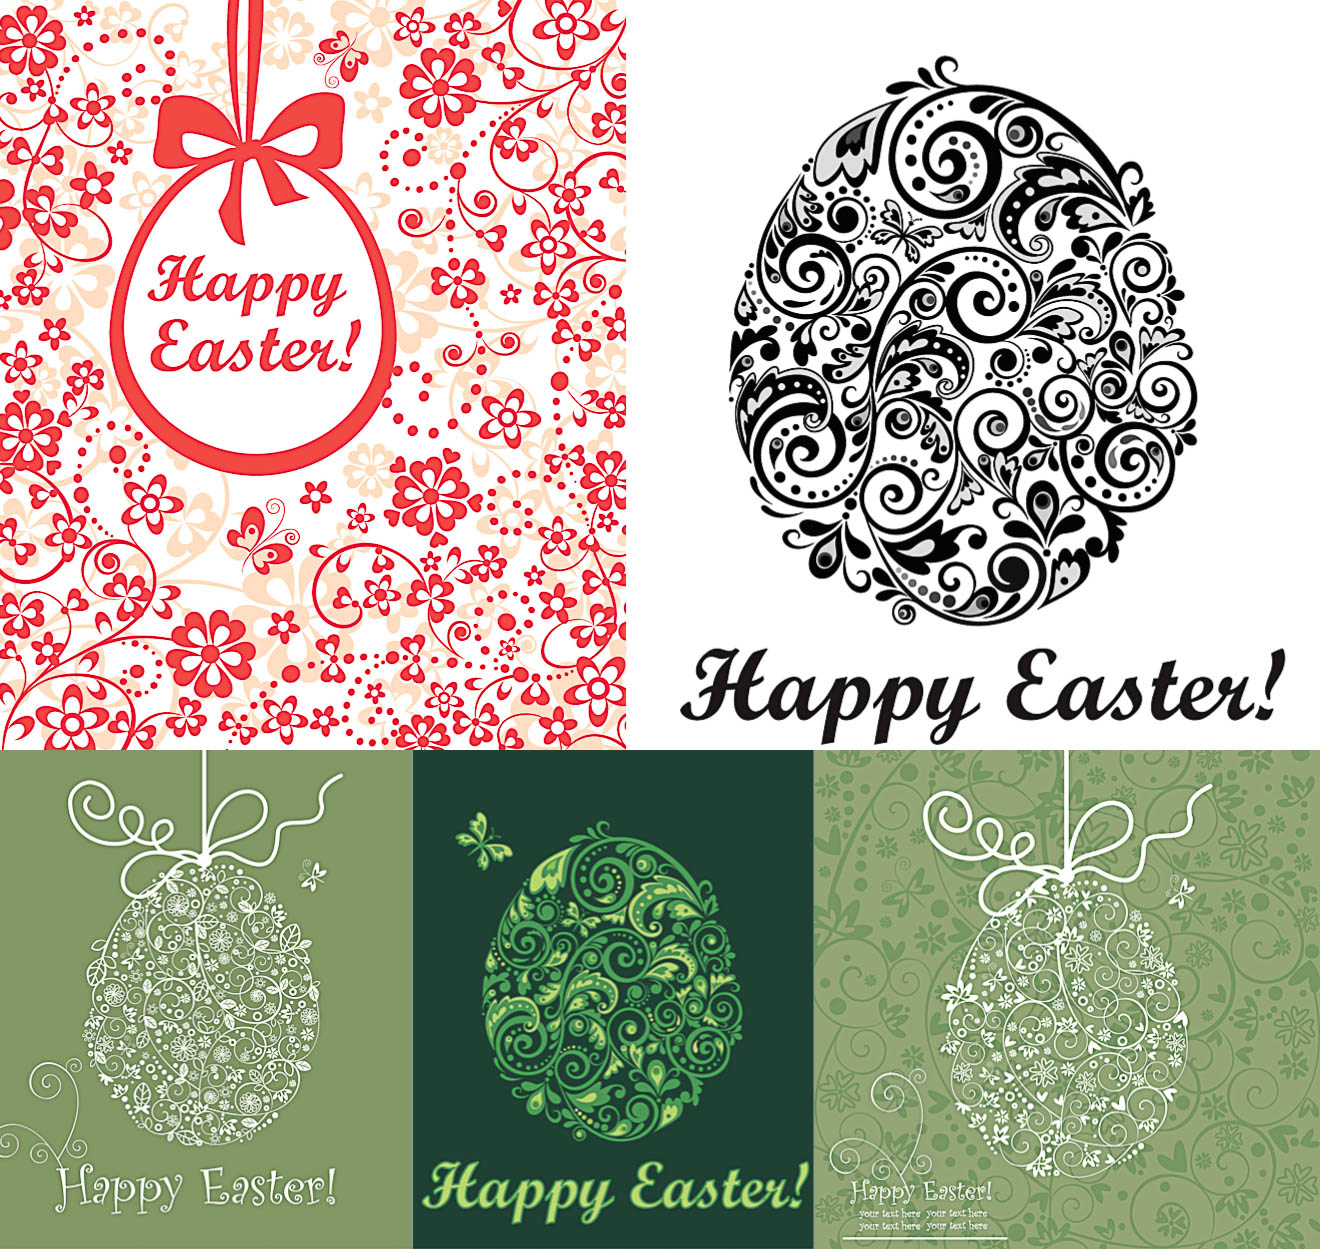 Easter eggs with floral ornaments vector